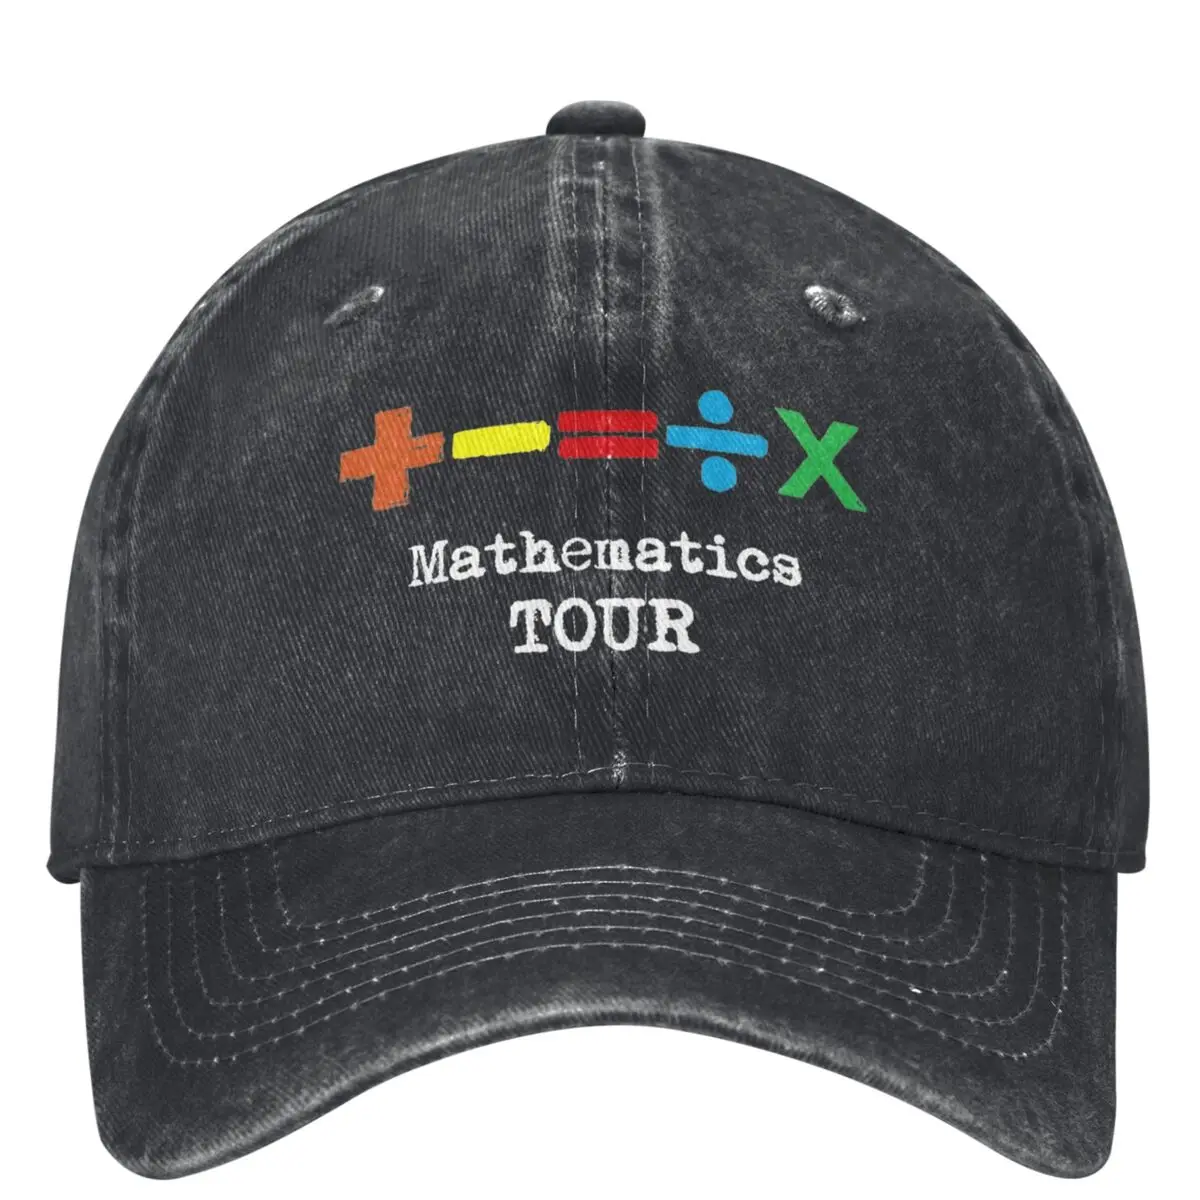 

The Mathematics Tour ED SHEERAN Baseball Cap Accessories For Unisex Vintage Distressed Washed Hats Snapback Hat Adjustable